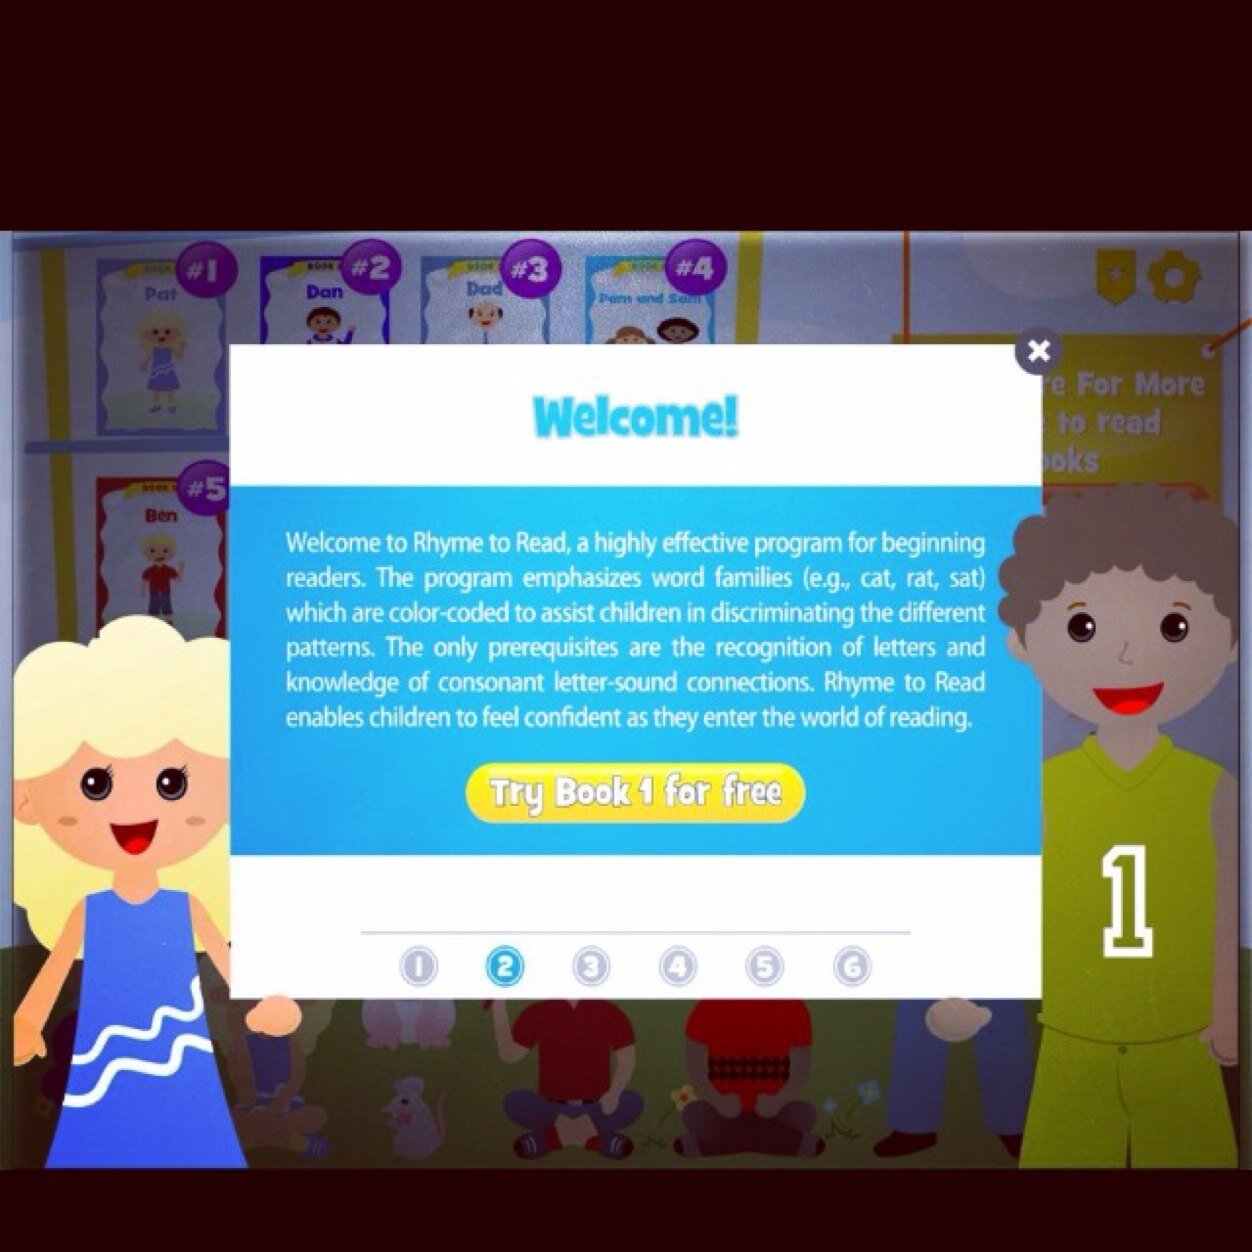 Rhyme to Read is an educational app for iPads. It is a 20 book, learn to read program that ensures a successful entry into reading for young children